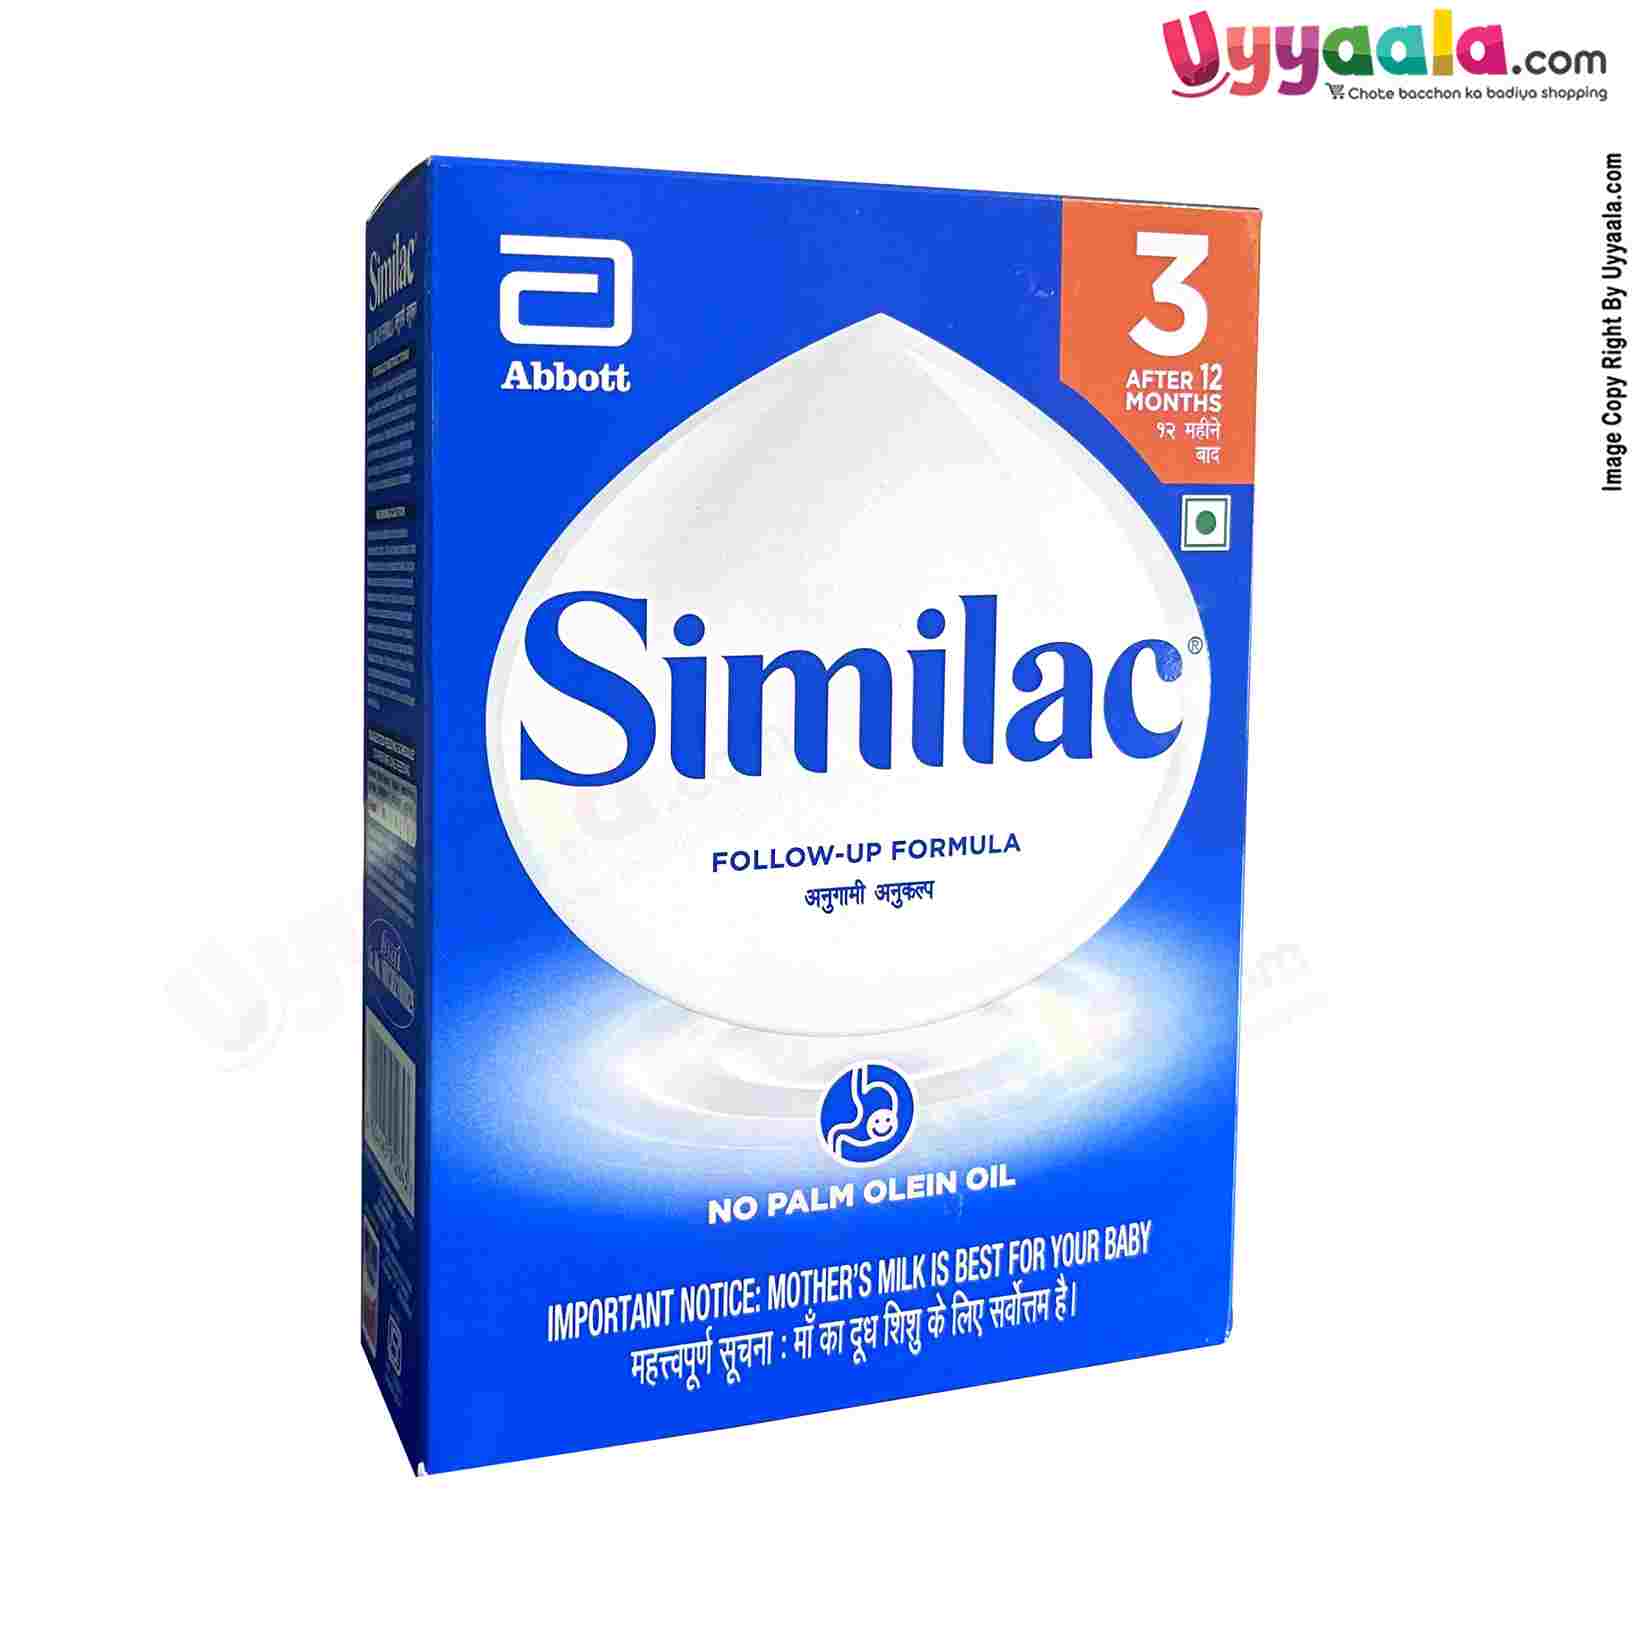 Go & Grow by Similac™  Stage 3 Toddler Formula